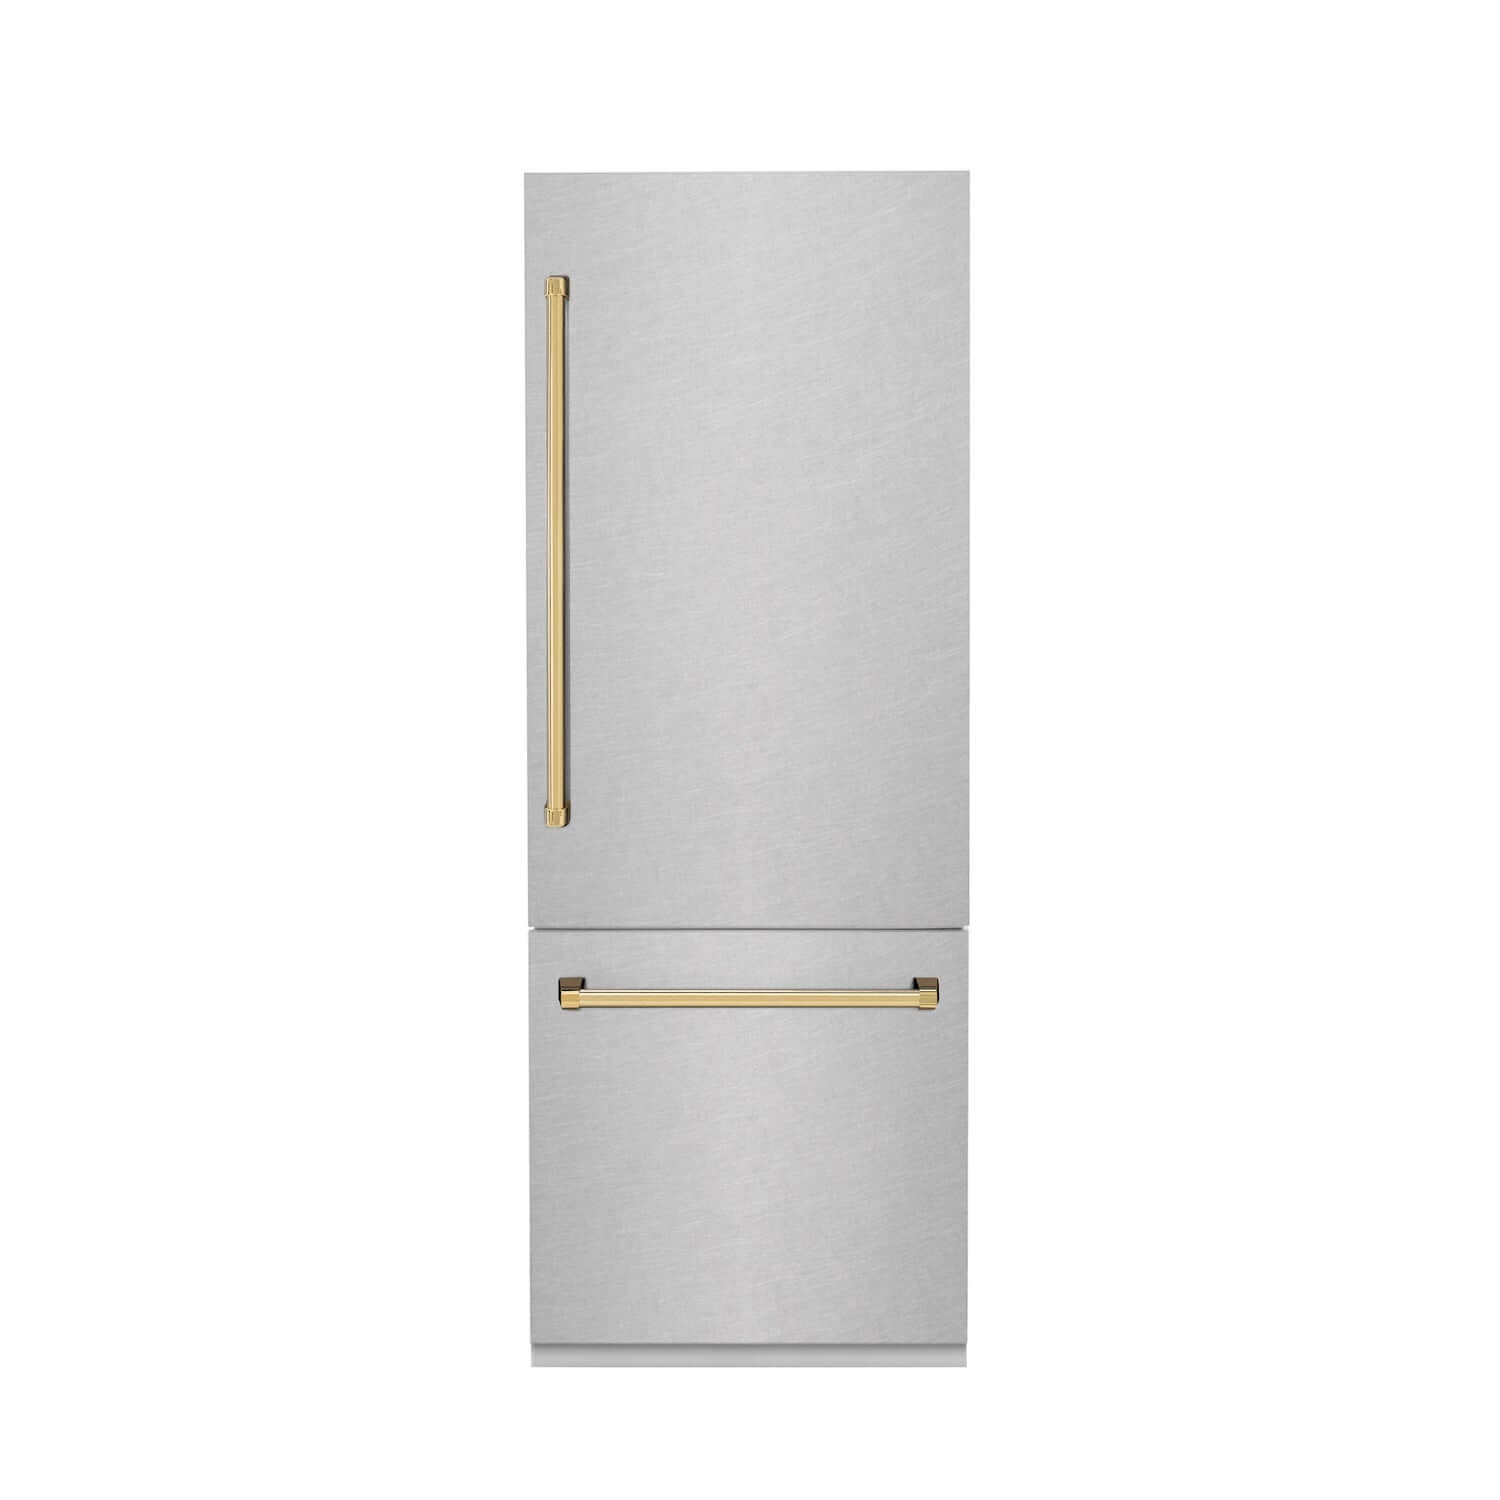 ZLINE Autograph Edition 30 in. 16.1 cu. ft. Built-in 2-Door Bottom Freezer Refrigerator with Internal Water and Ice Dispenser in Fingerprint Resistant Stainless Steel with Polished Gold Accents (RBIVZ-SN-30-G) front, closed.